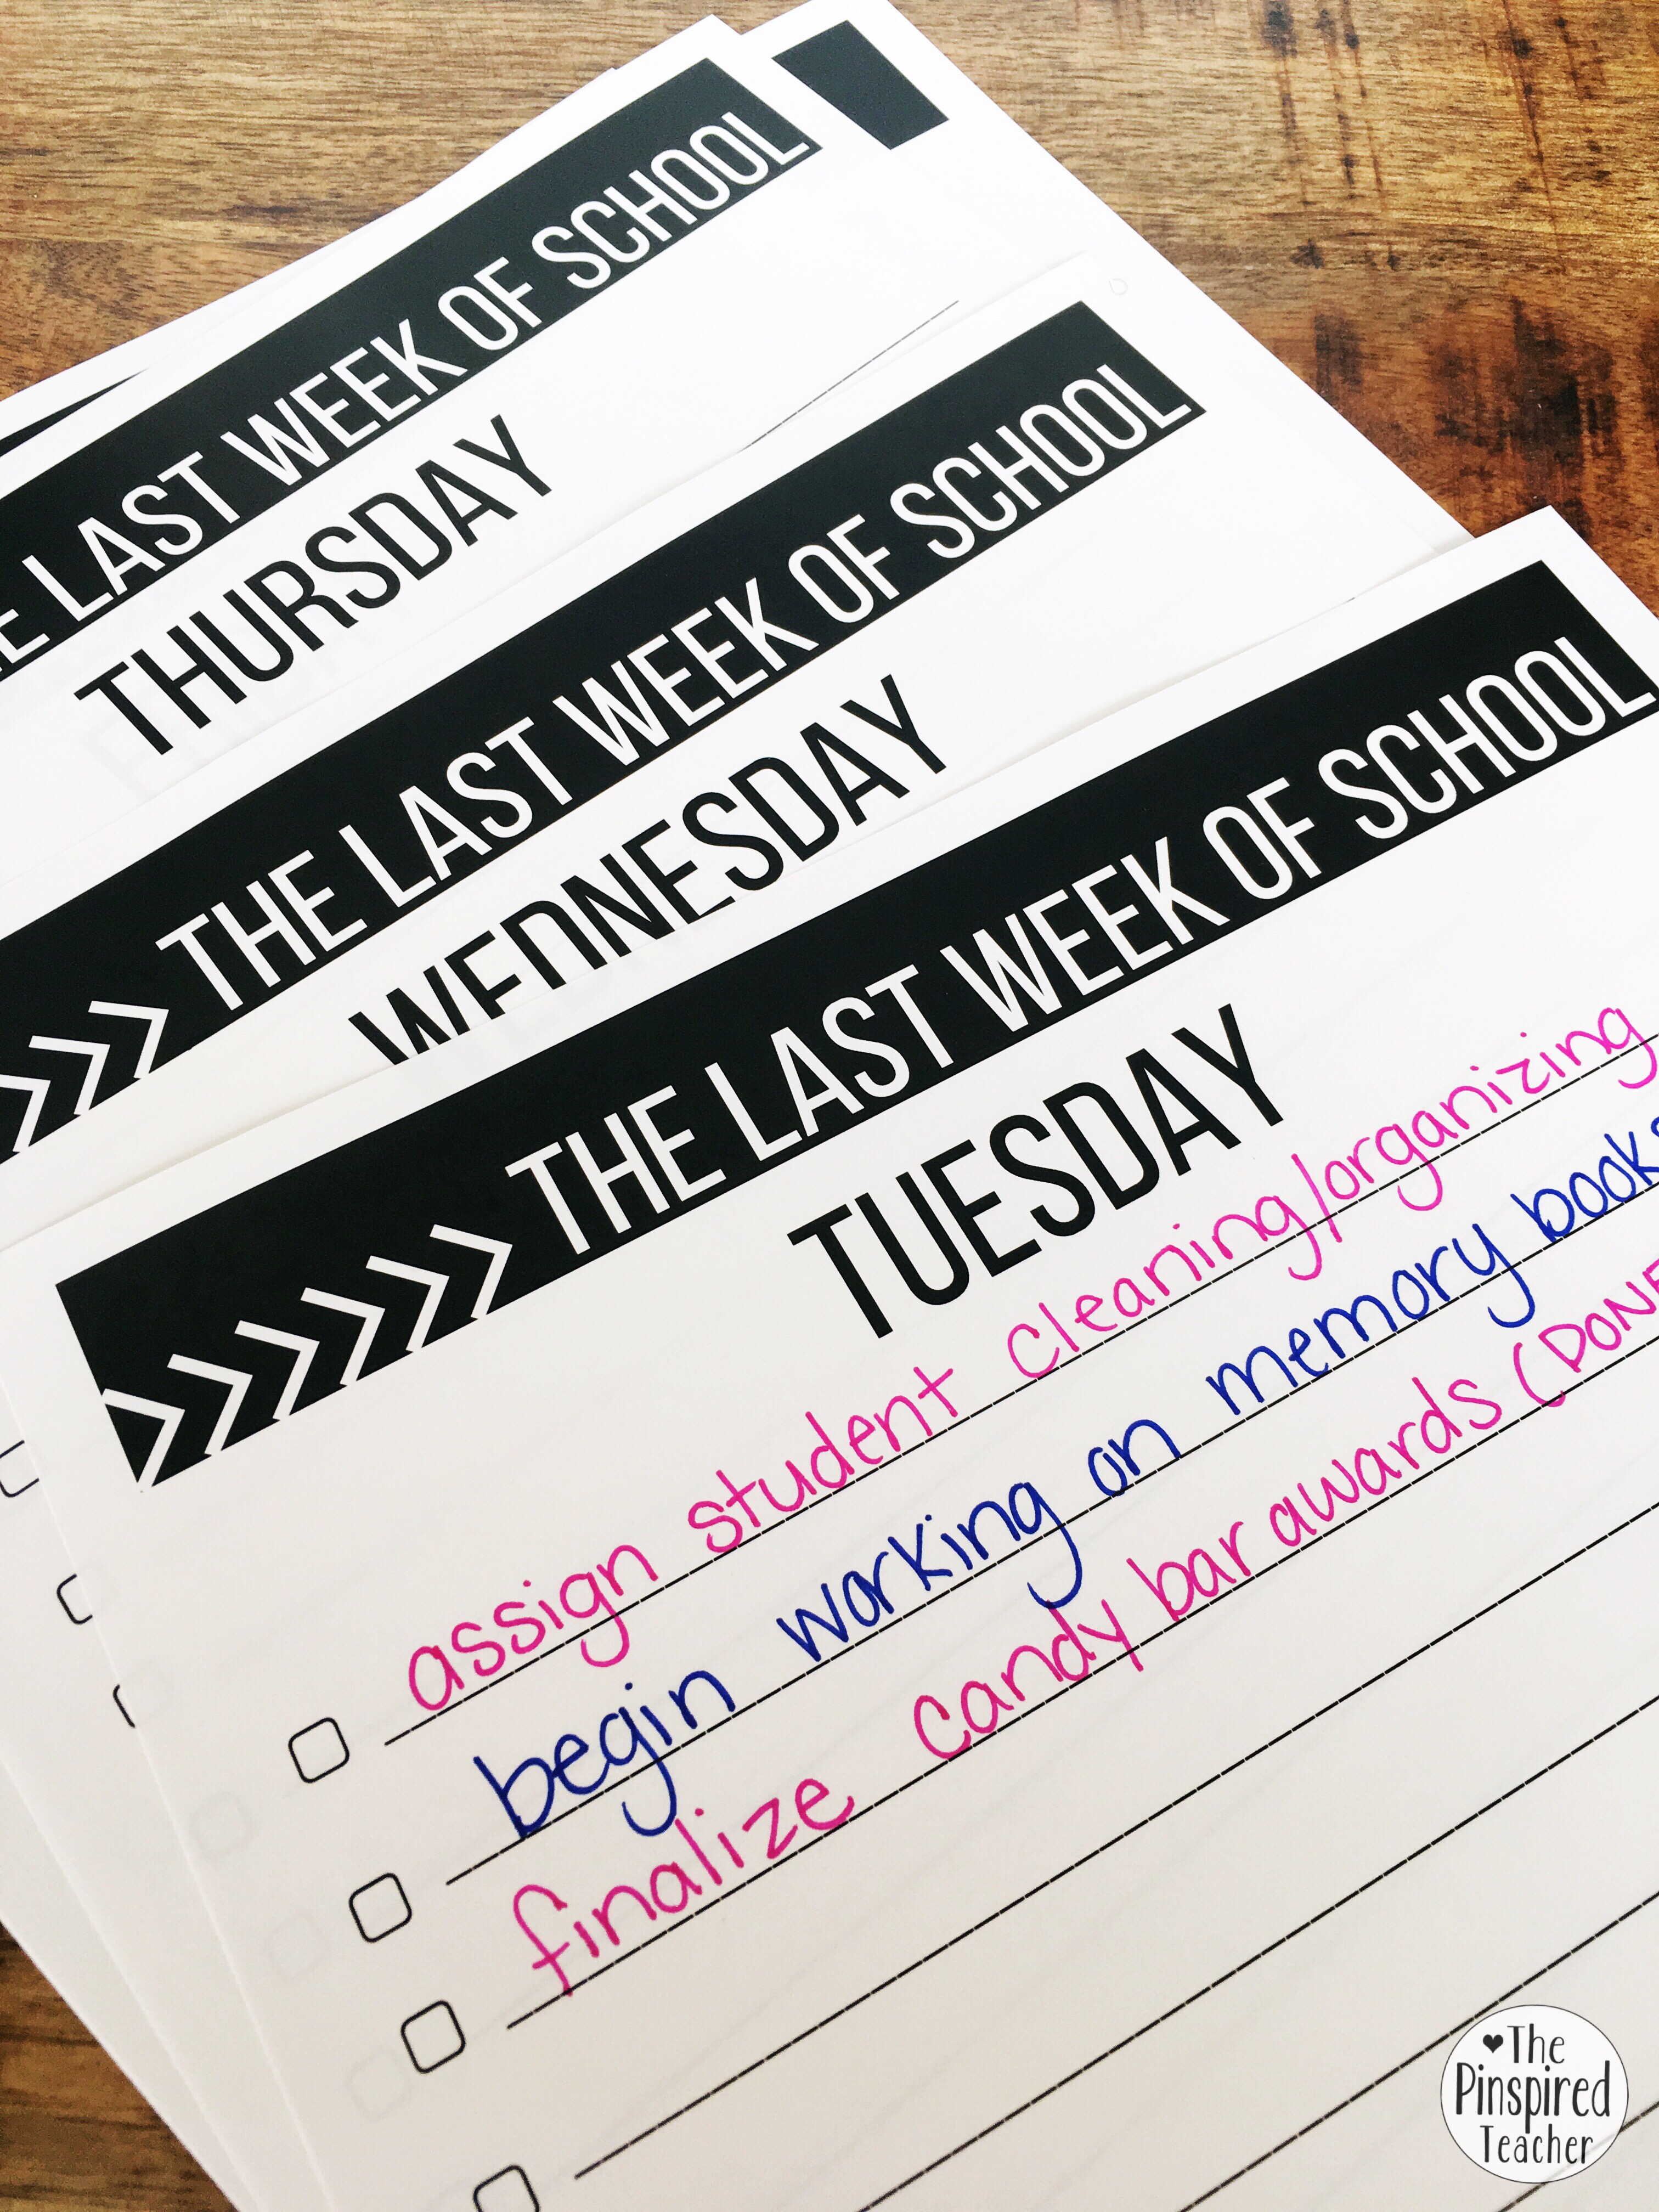 FREE planning checklists for the last week of school by the pinspired teacher